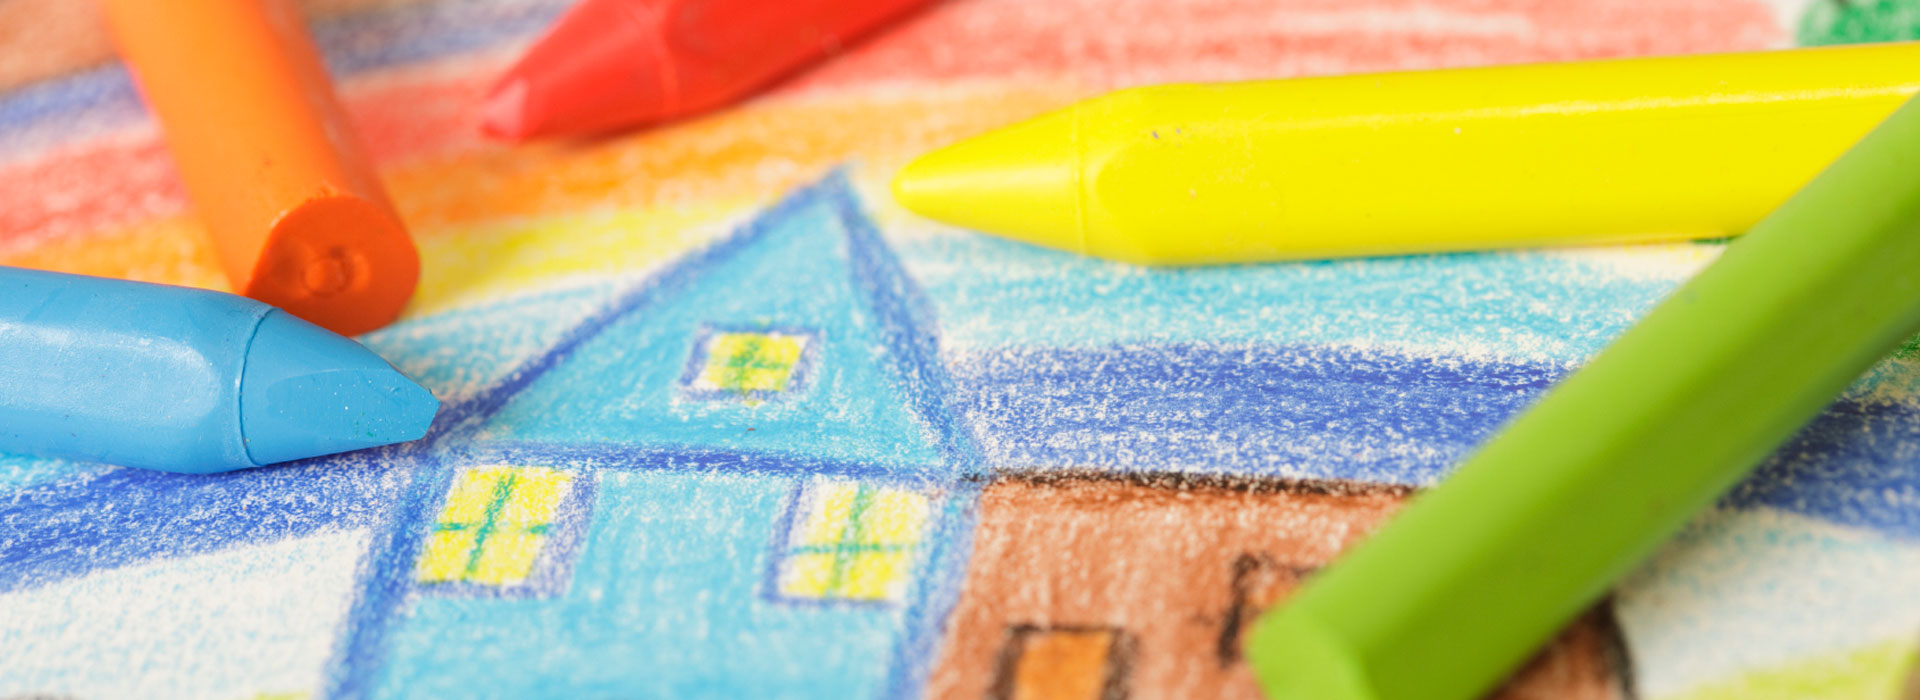 Crayons and drawing of a house